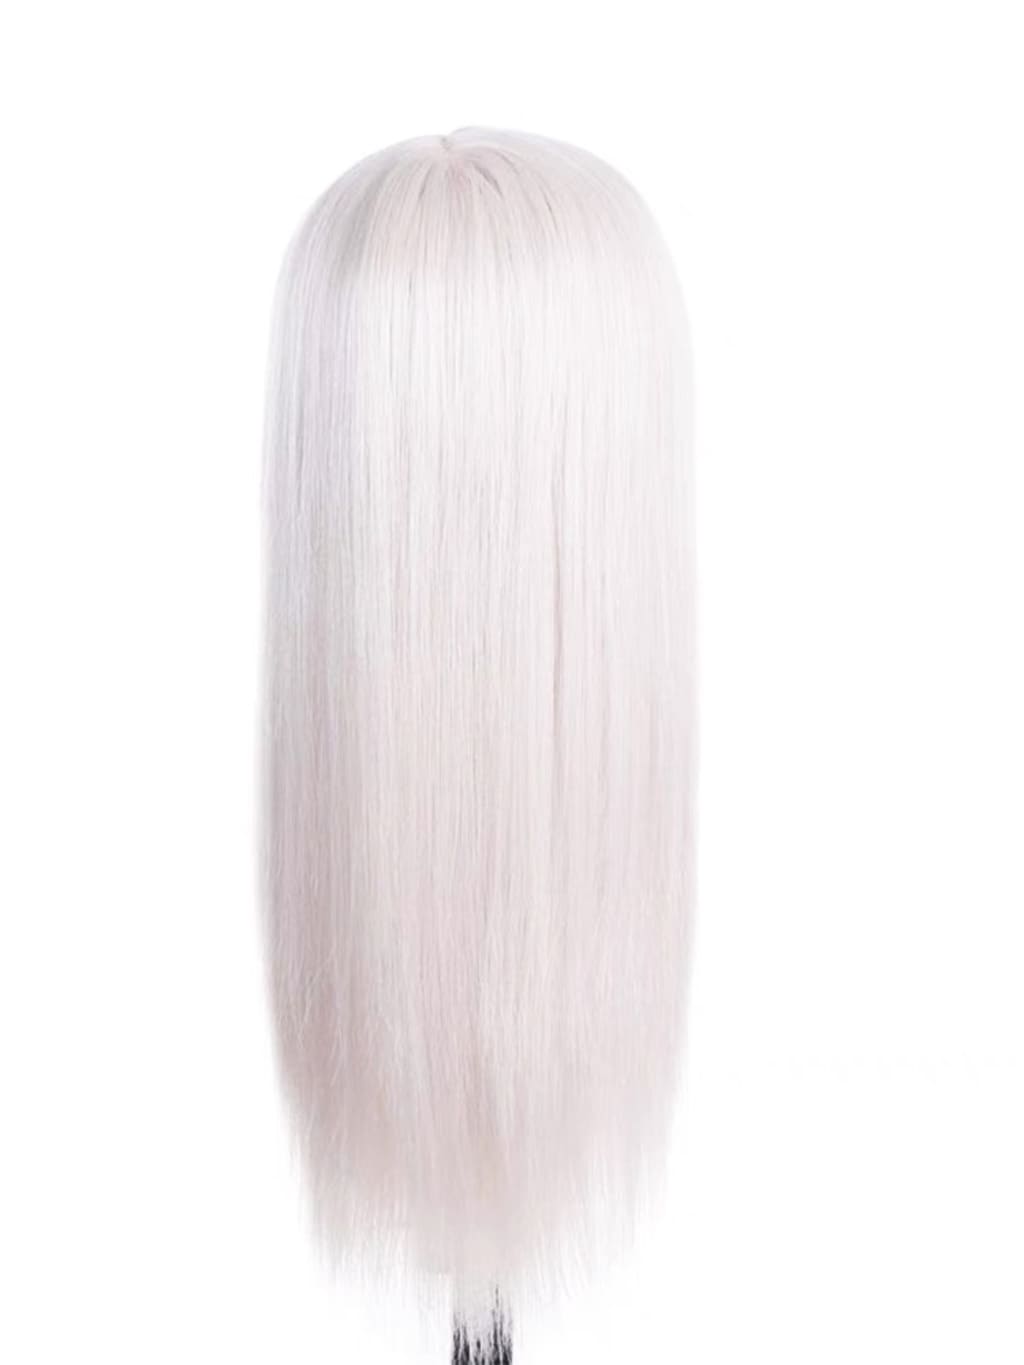 26 inch long white front lace wig